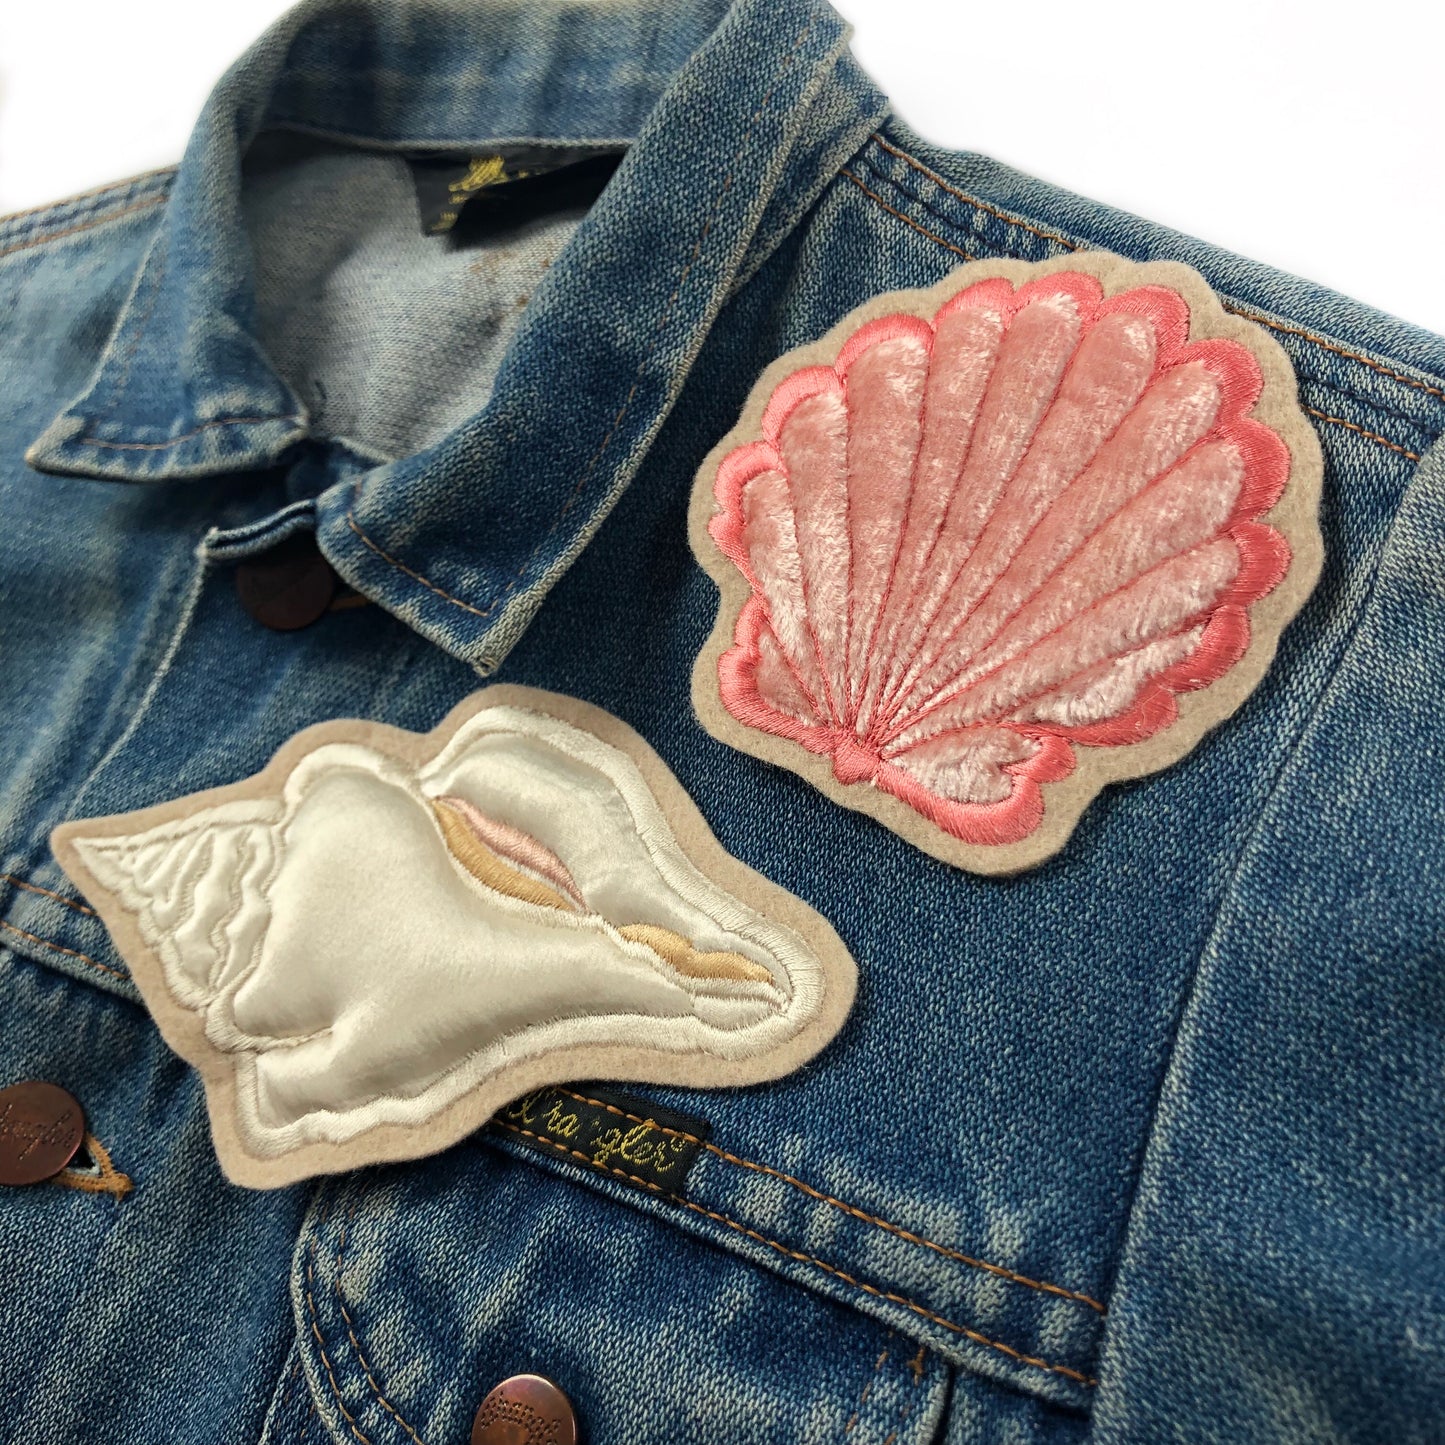 Padded velvet clam patch and white satin conch patch on front breast of a denim jacket